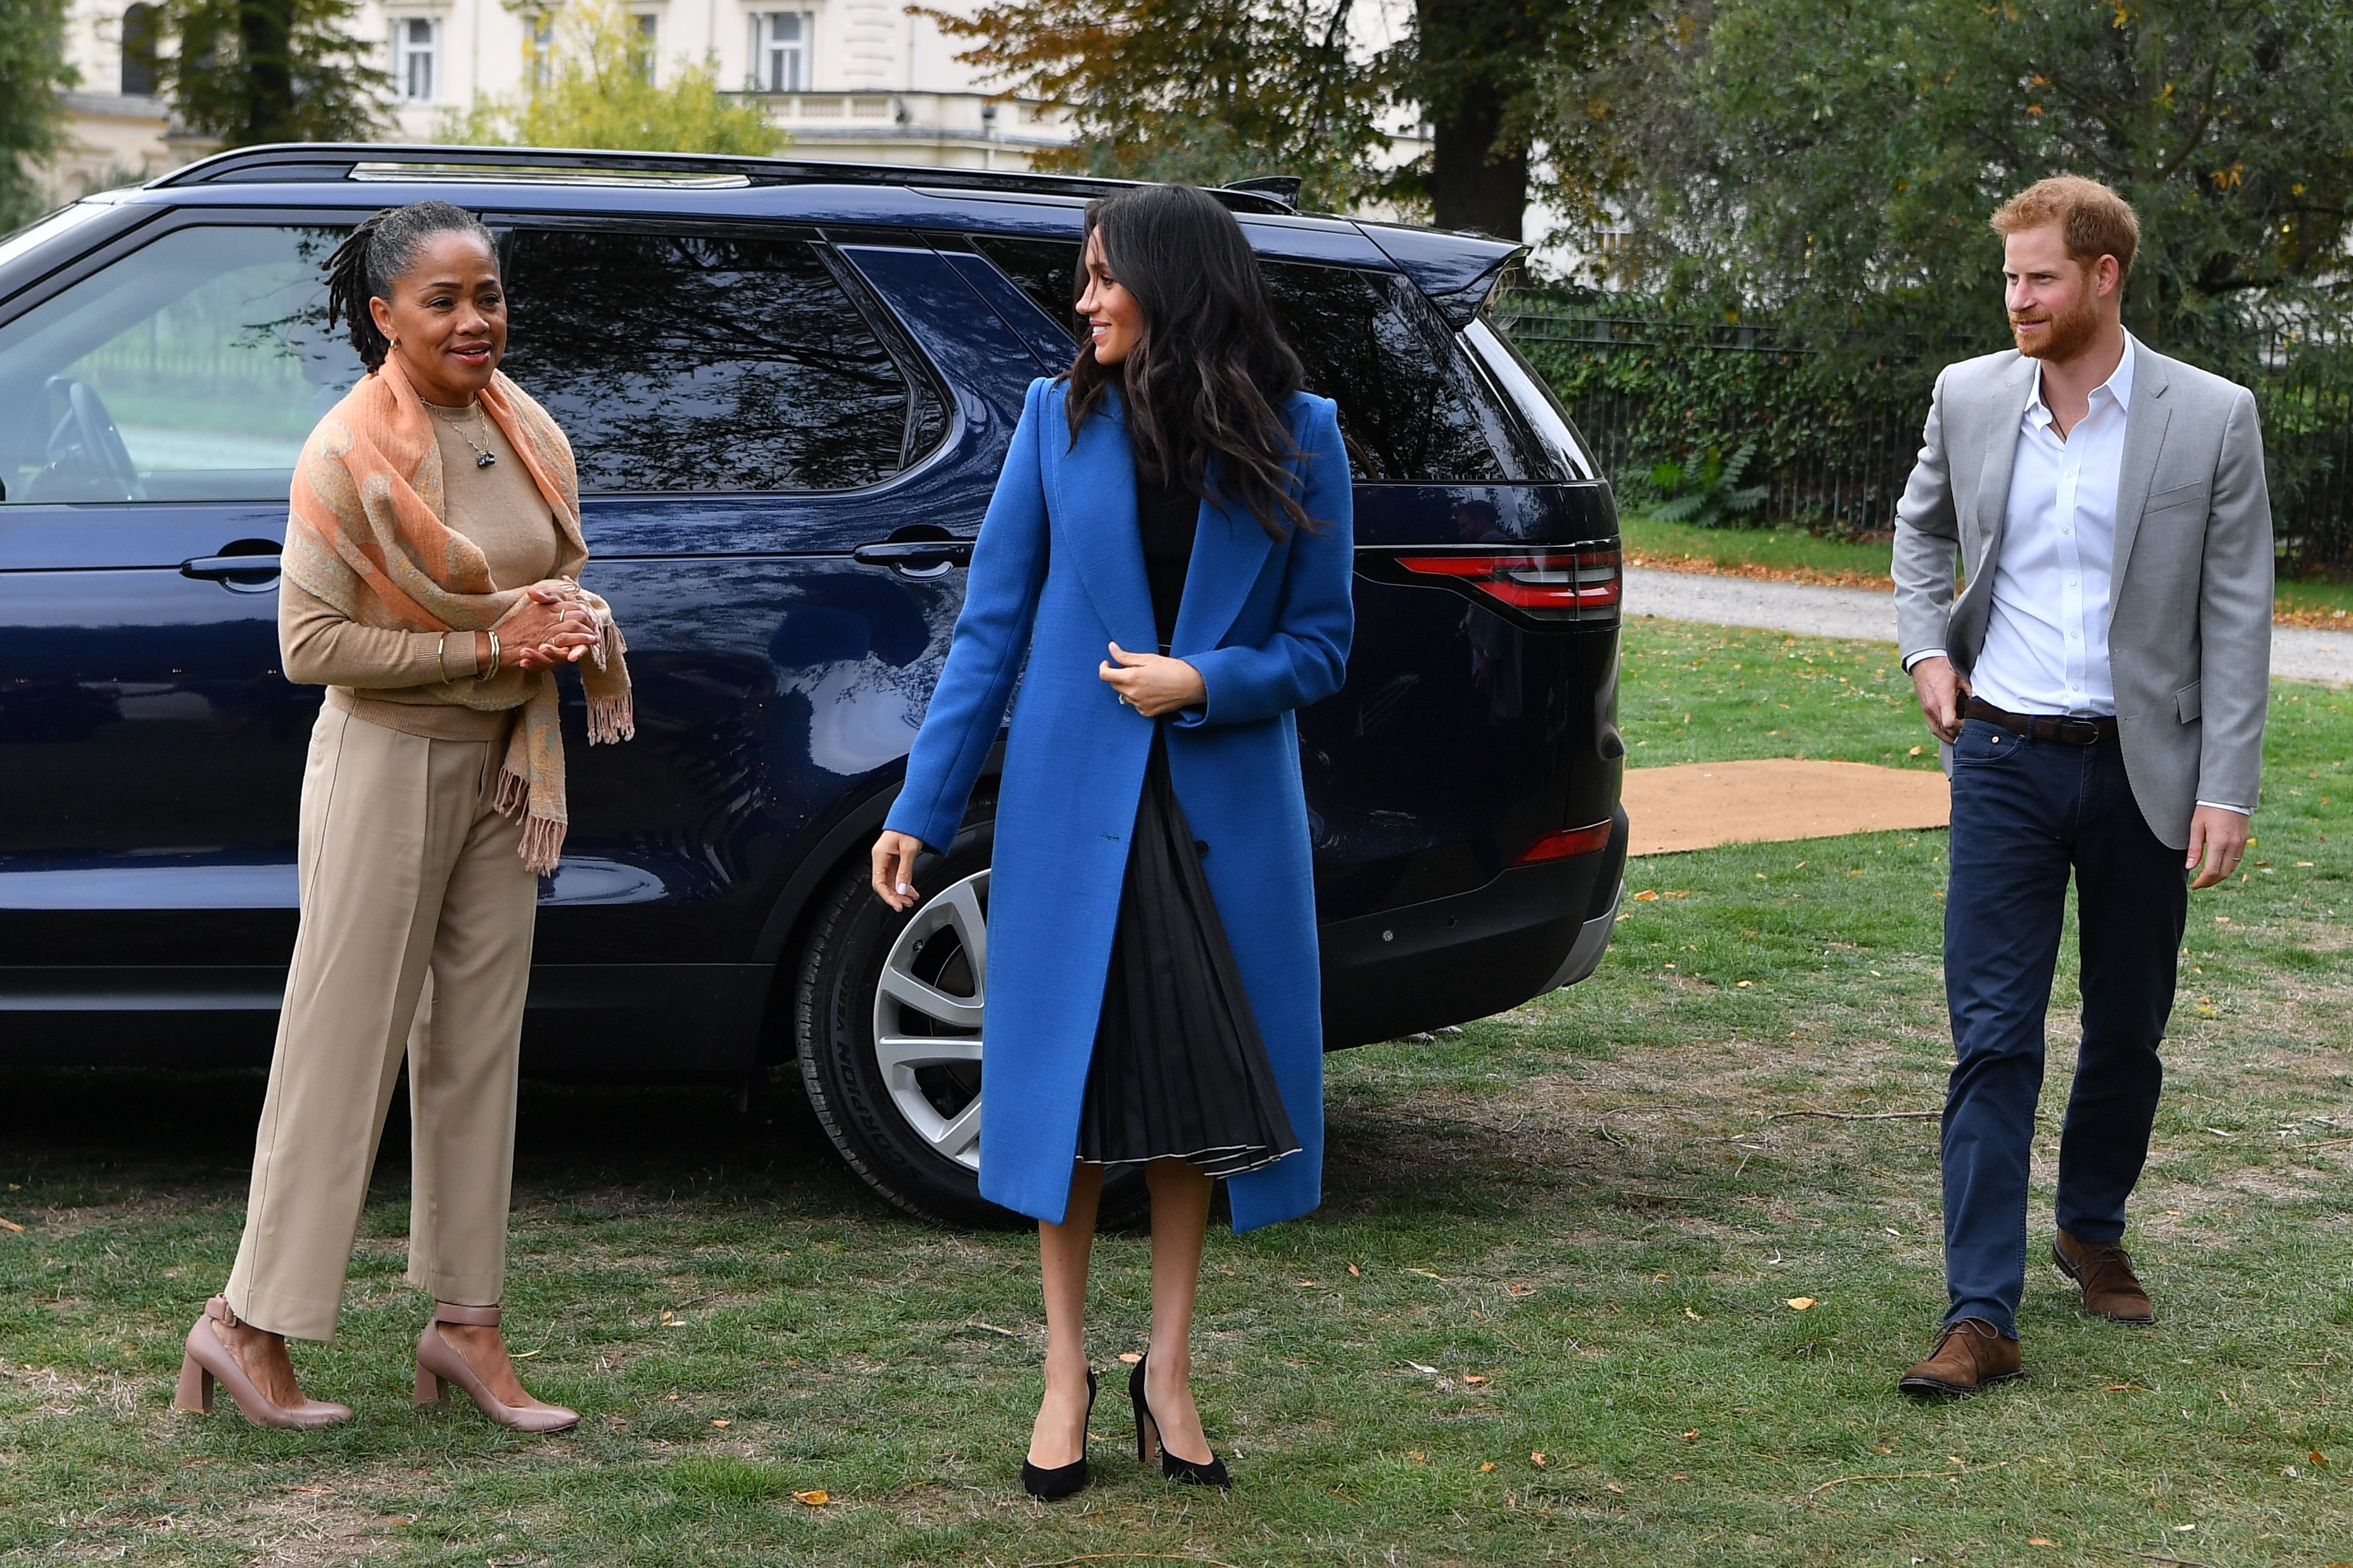 Doria Ragland, Meghan Markle and Prince Harry at an event to mark the launch of a cookbook with recipes from a group of women affected by the Grenfell Tower fire at Kensington Palaceon September 20, 2018 in London, England | Photo: Getty Images